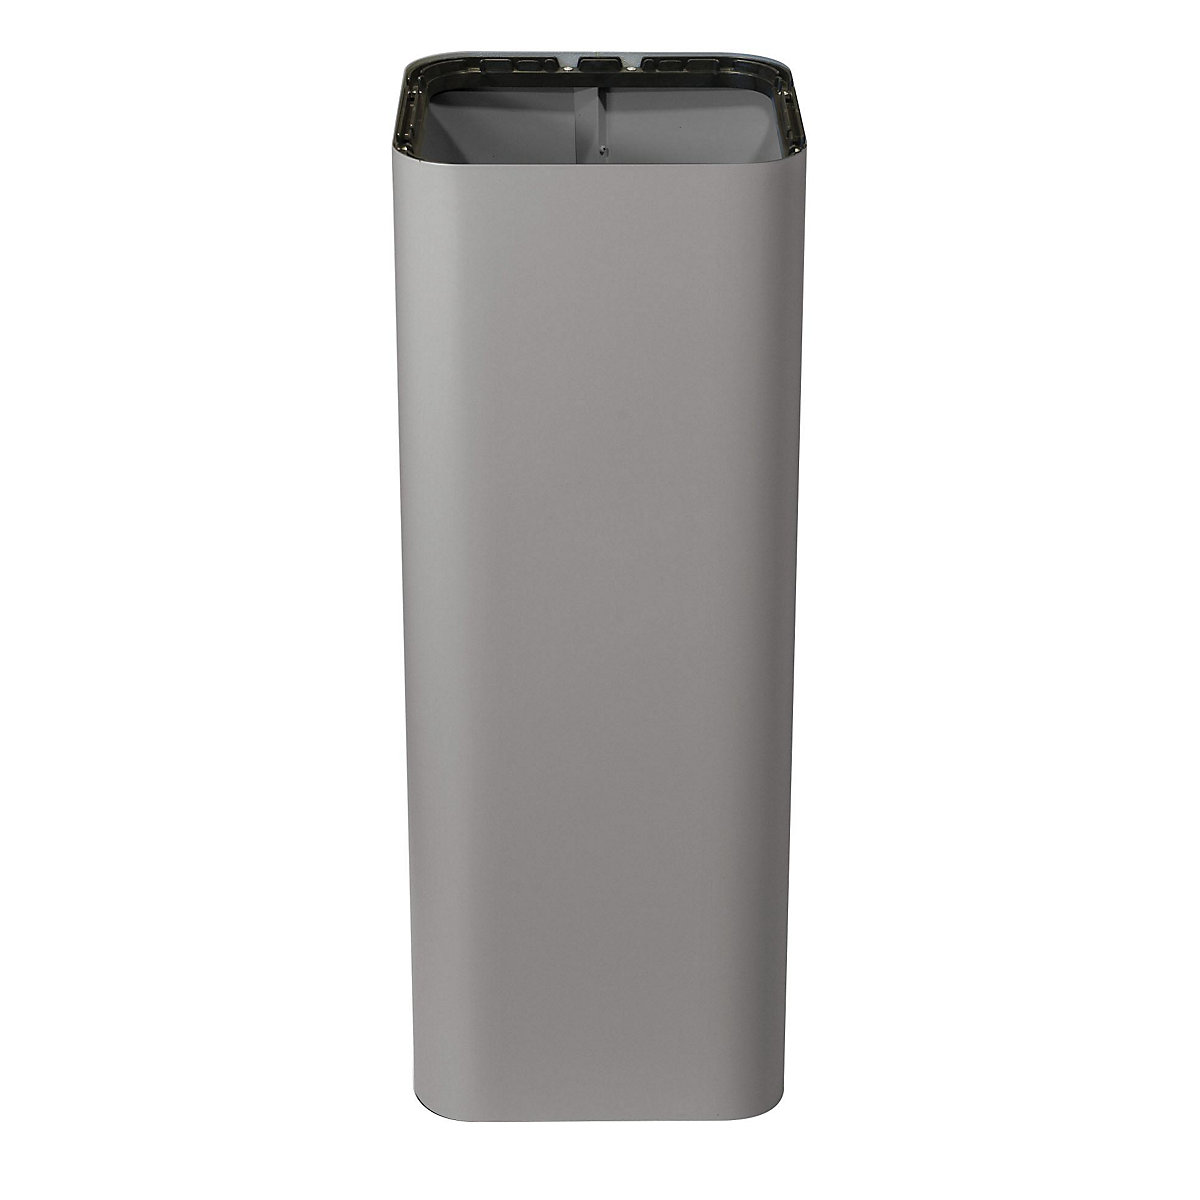 PURE recyclable waste collector, capacity 100 l, WxHxD 385 x 800 x 385 mm, grey